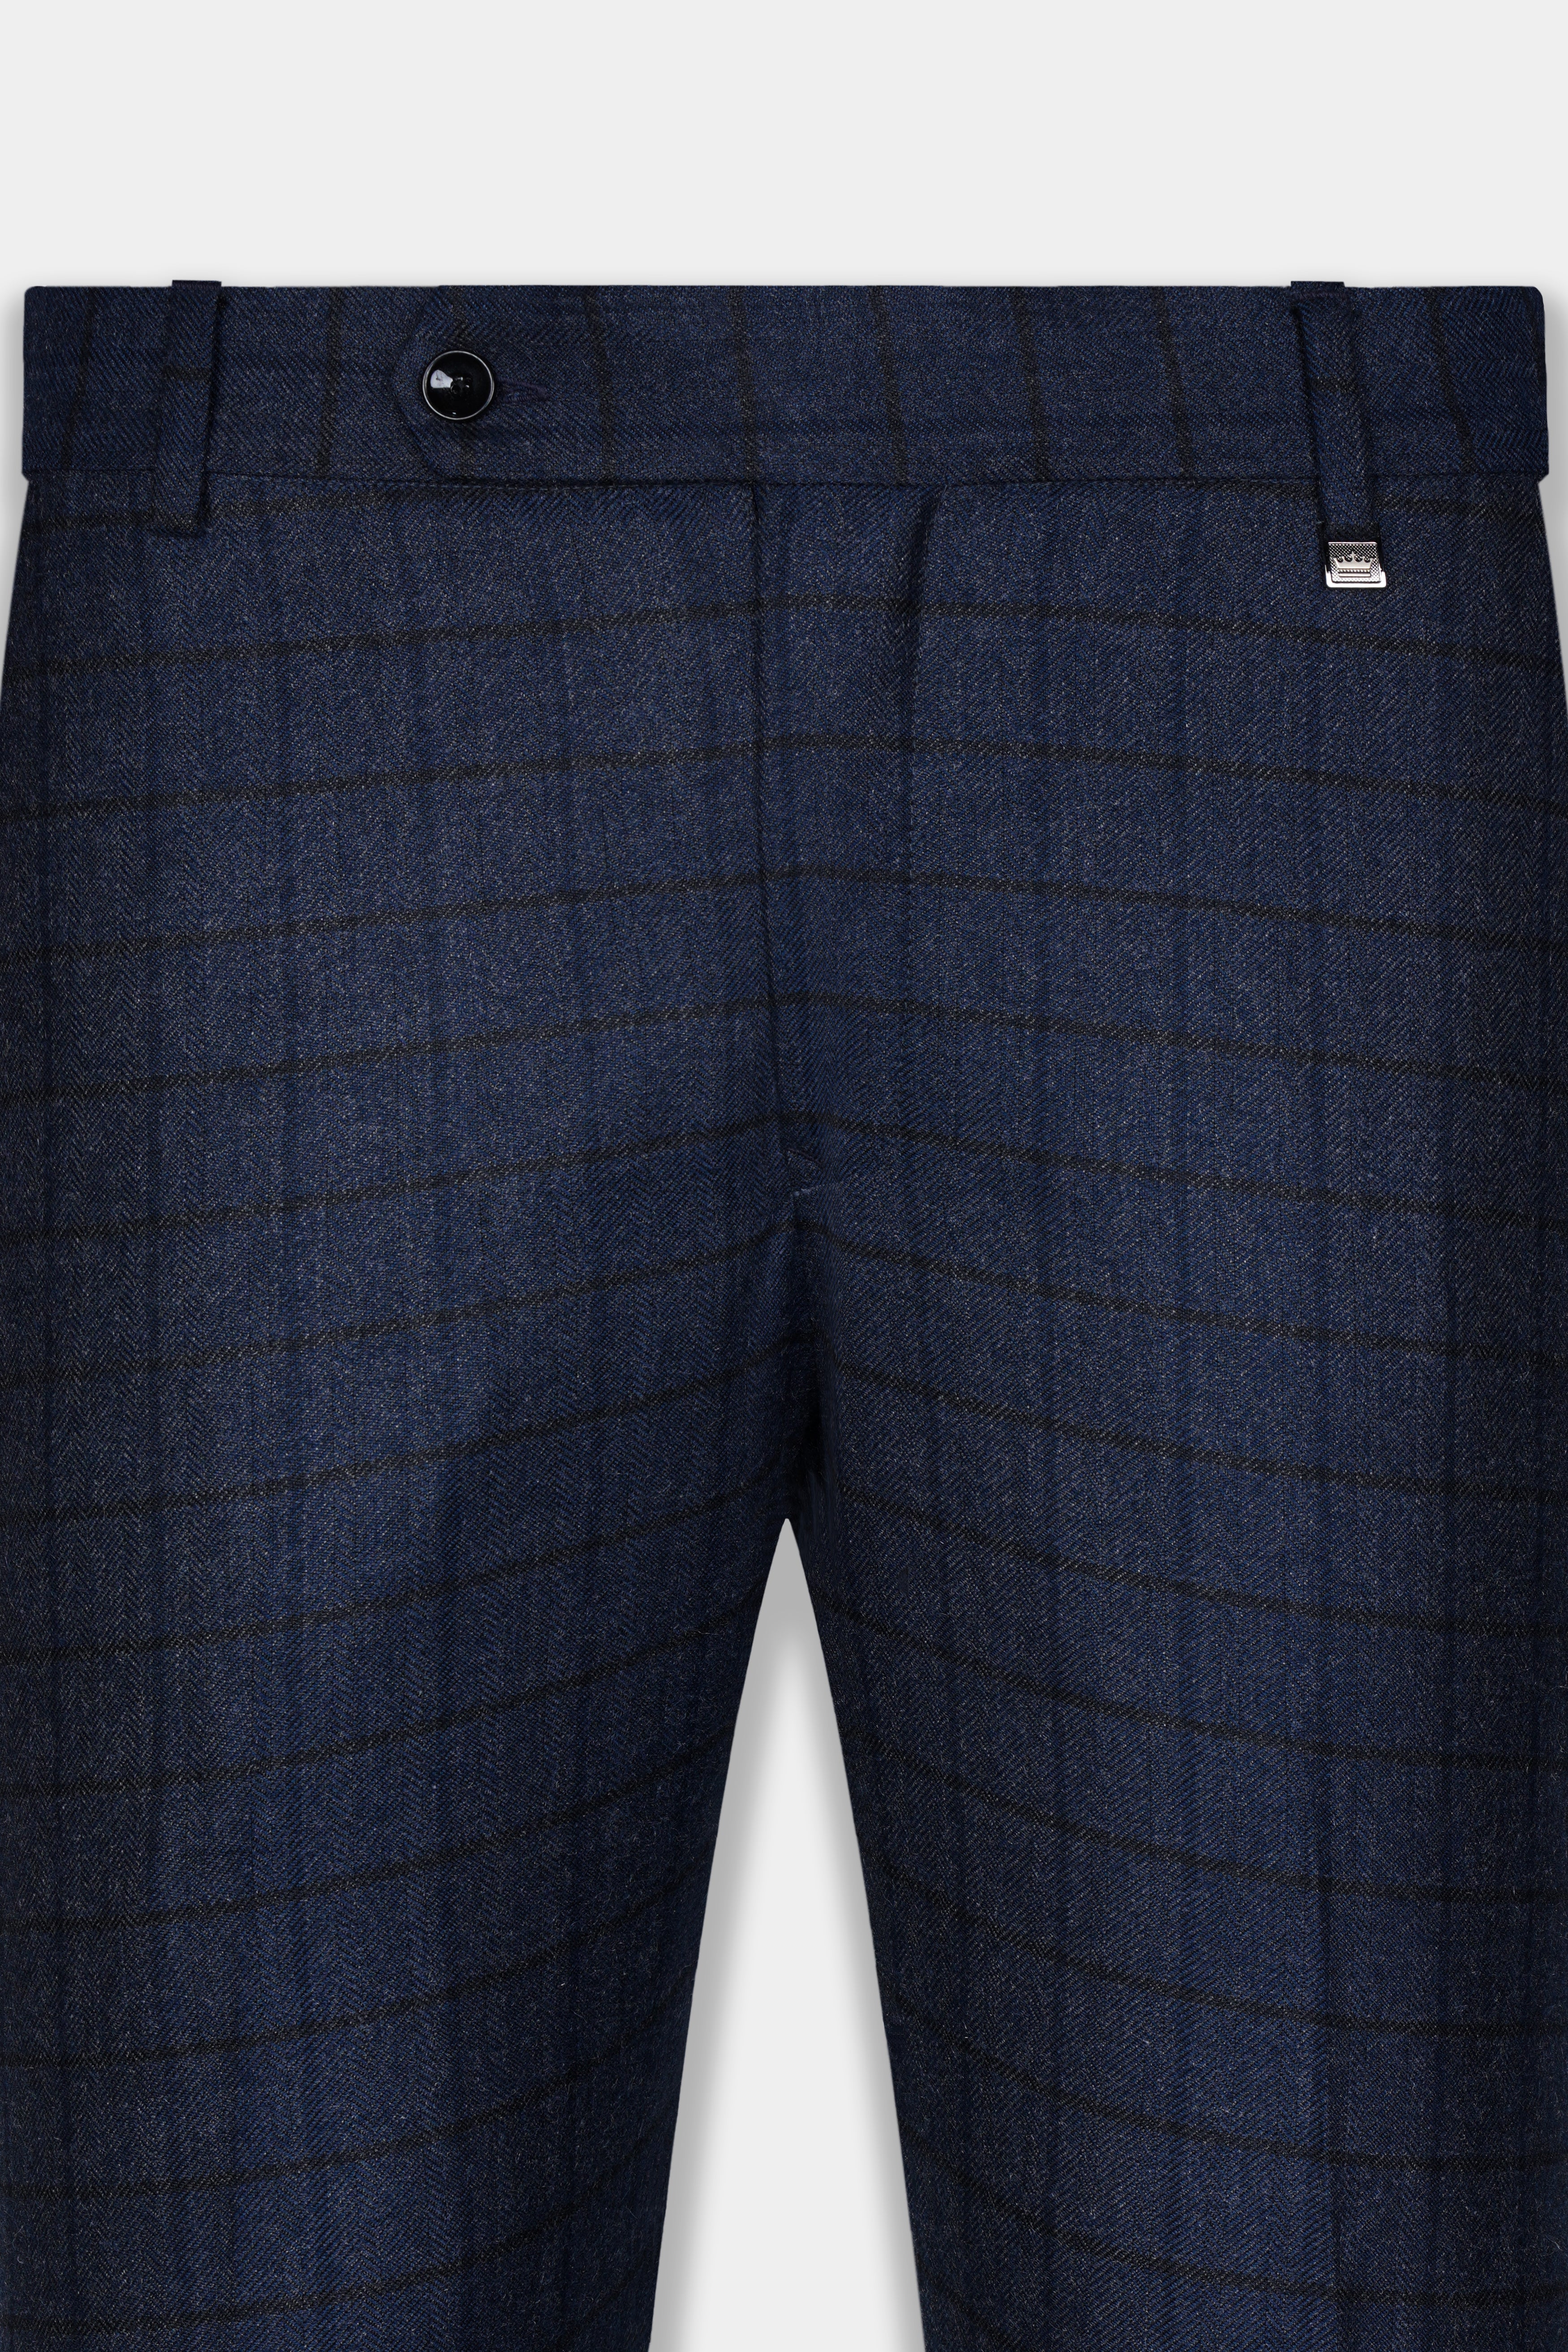 Slim Fit Navy Blue Check Trousers | Buy Online at Moss